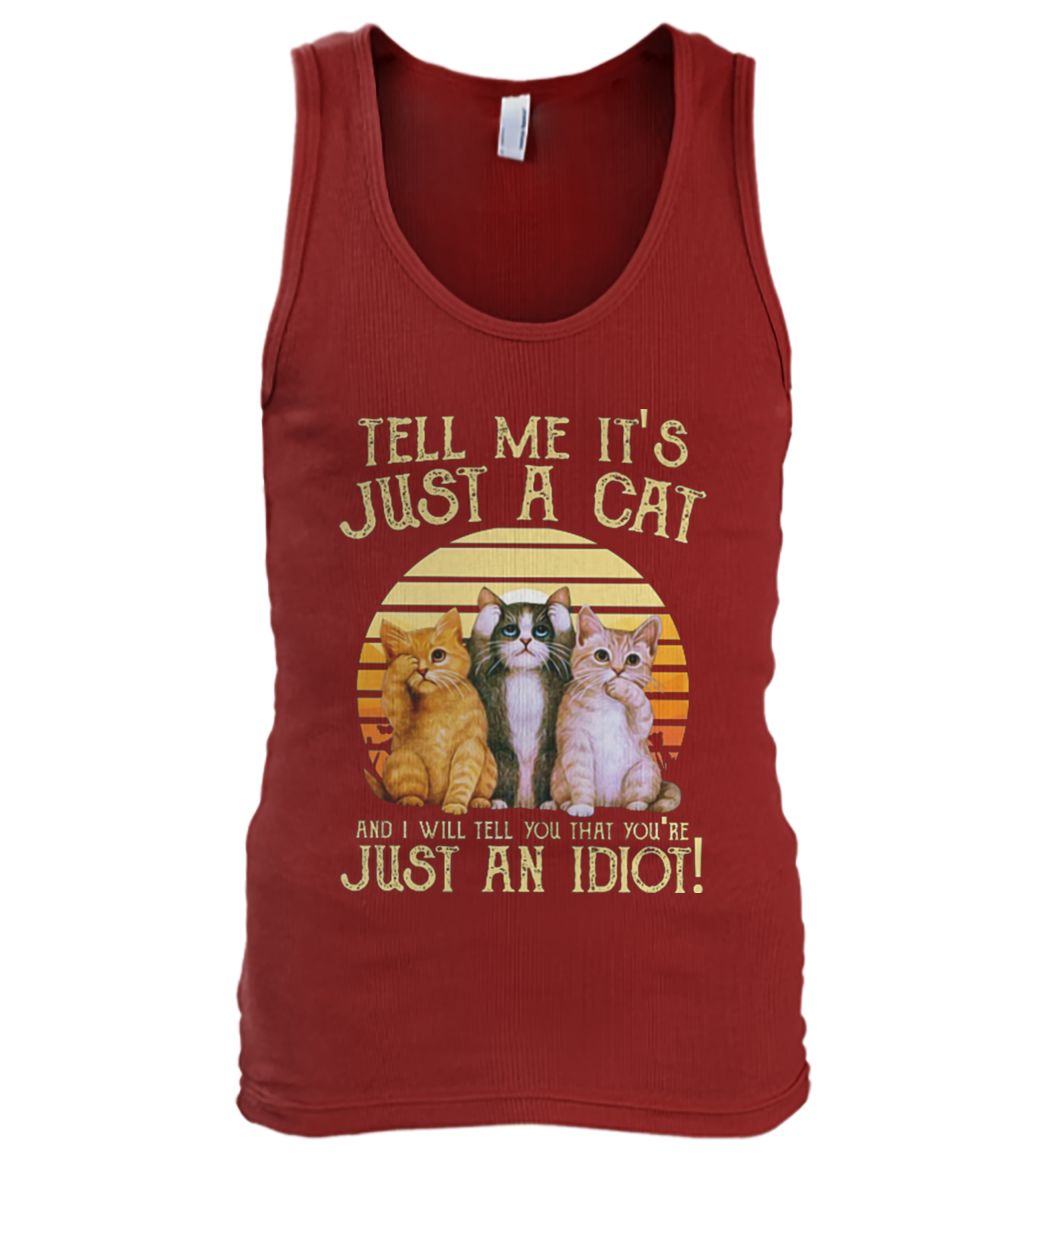 Vintage tell me it's just a cat and I will tell you that you're just an idiot men's tank top